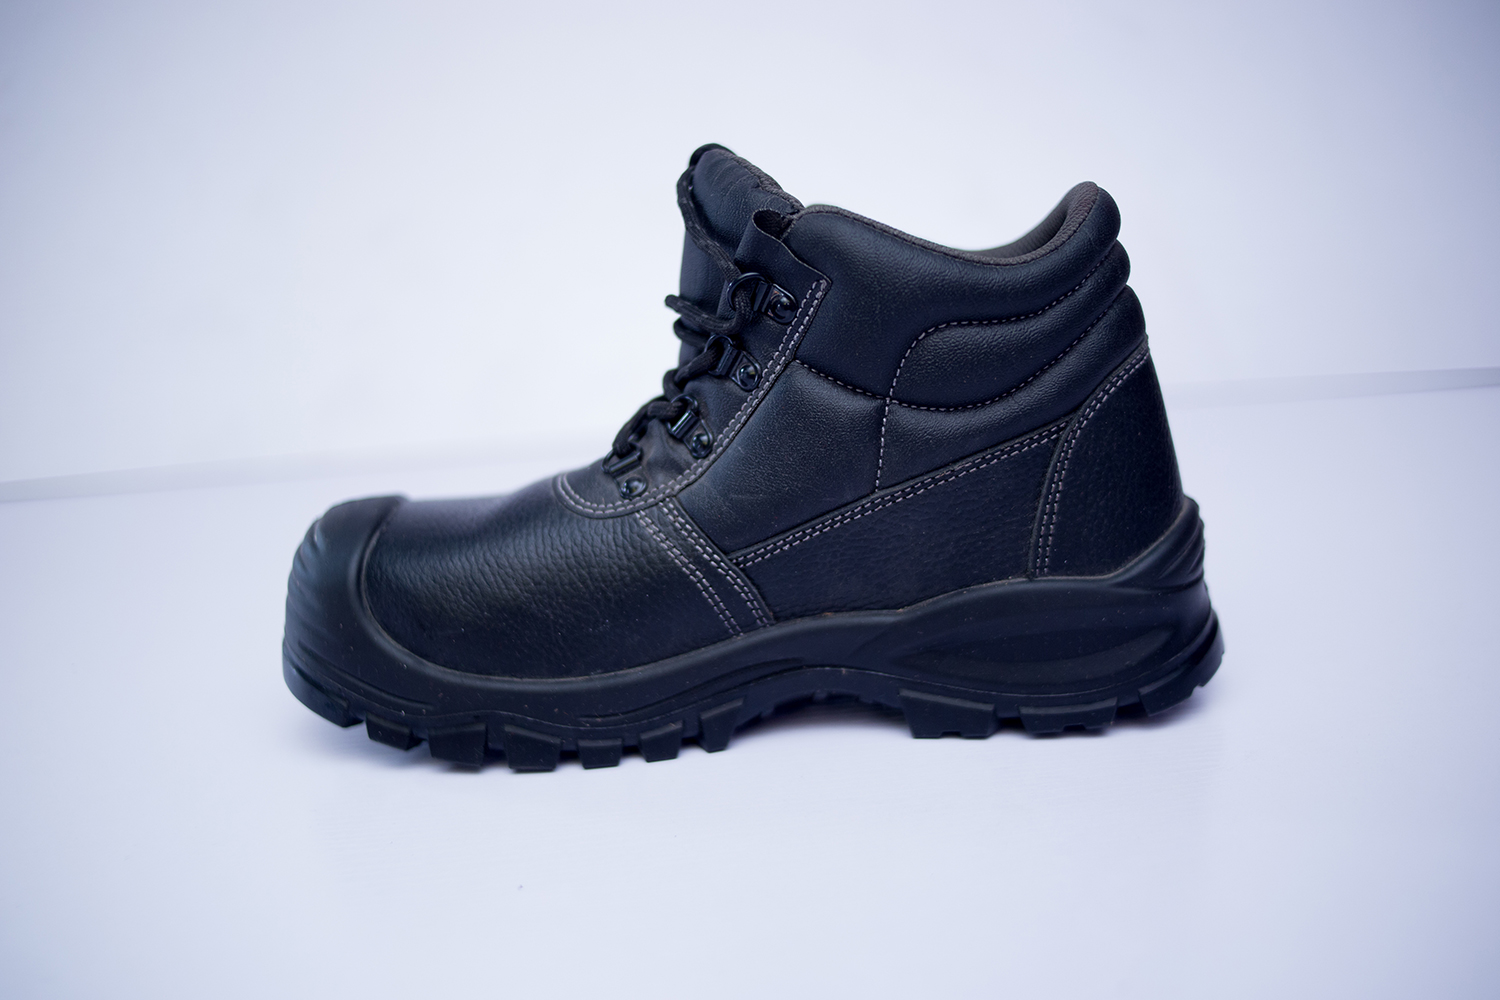 Anaps Wear and Tear Resilience Safety First Boot All Black - Anaps ...